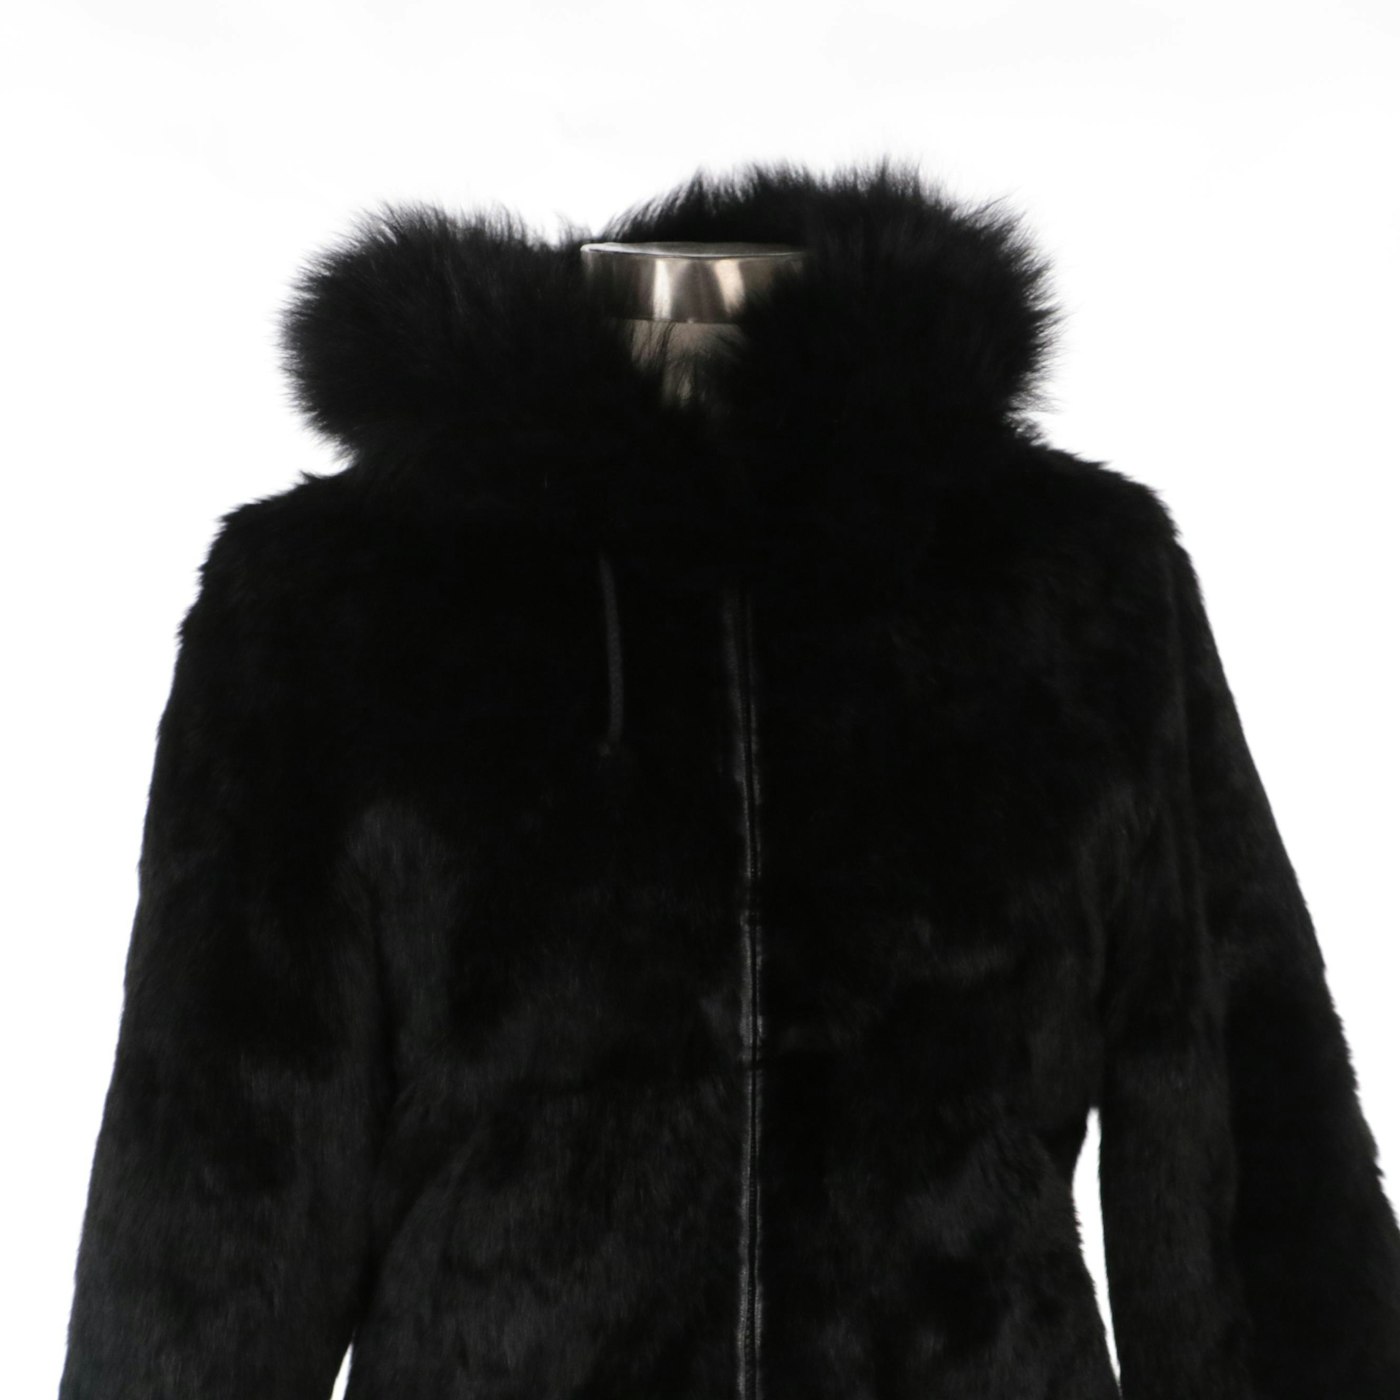 Rabbit Fur Hoodie with Fox Fur Trim from Vincents | EBTH